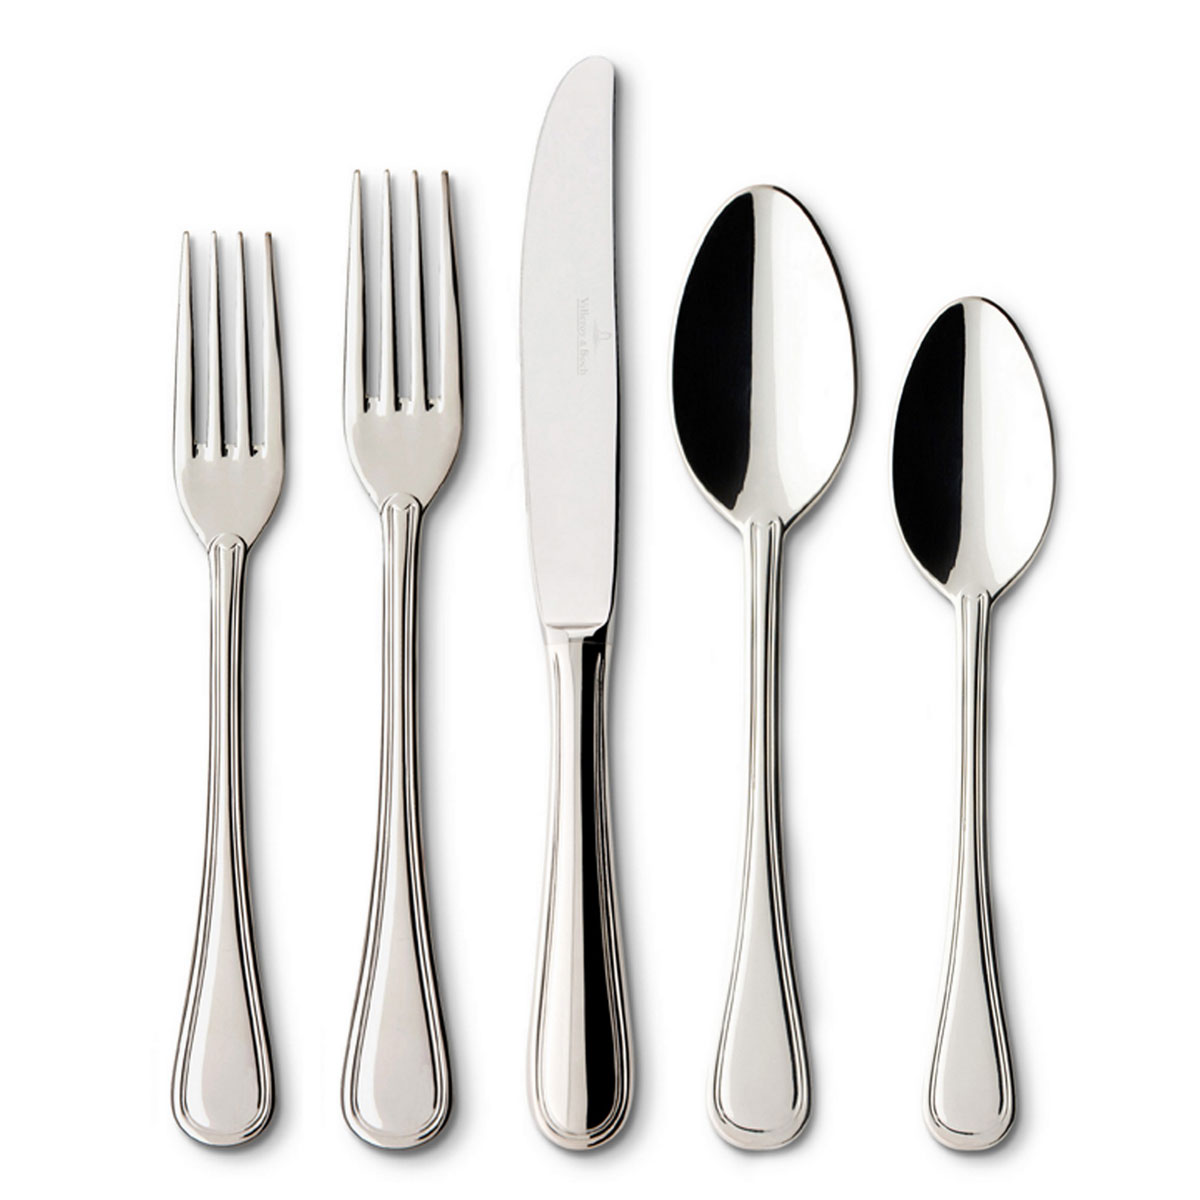 Villeroy and Boch Merlemont 5 Piece Place Setting Flatware